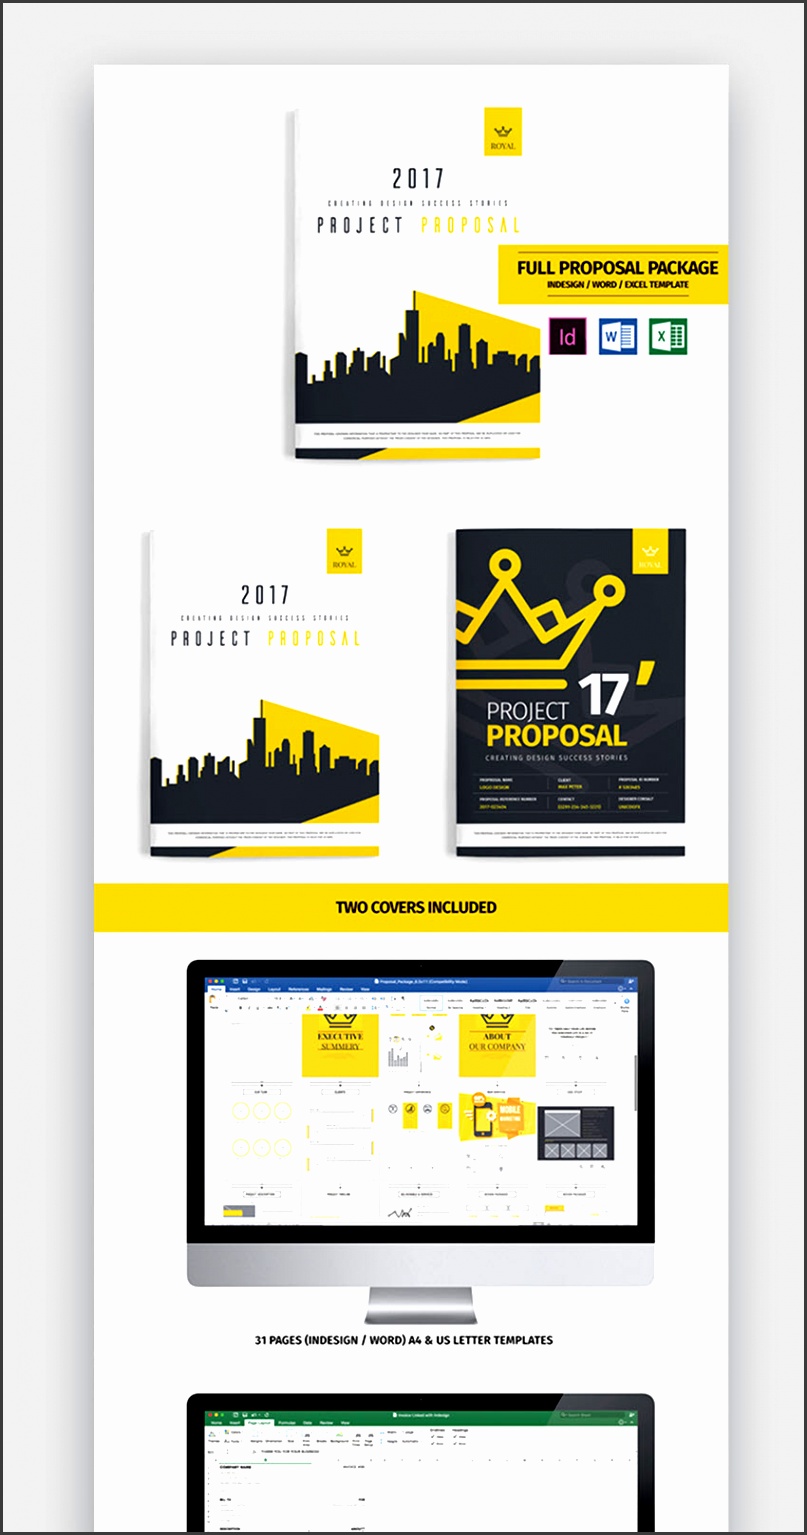 This professional proposal template boasts 31 pages Choose from many and varied page designs to your proposal message across